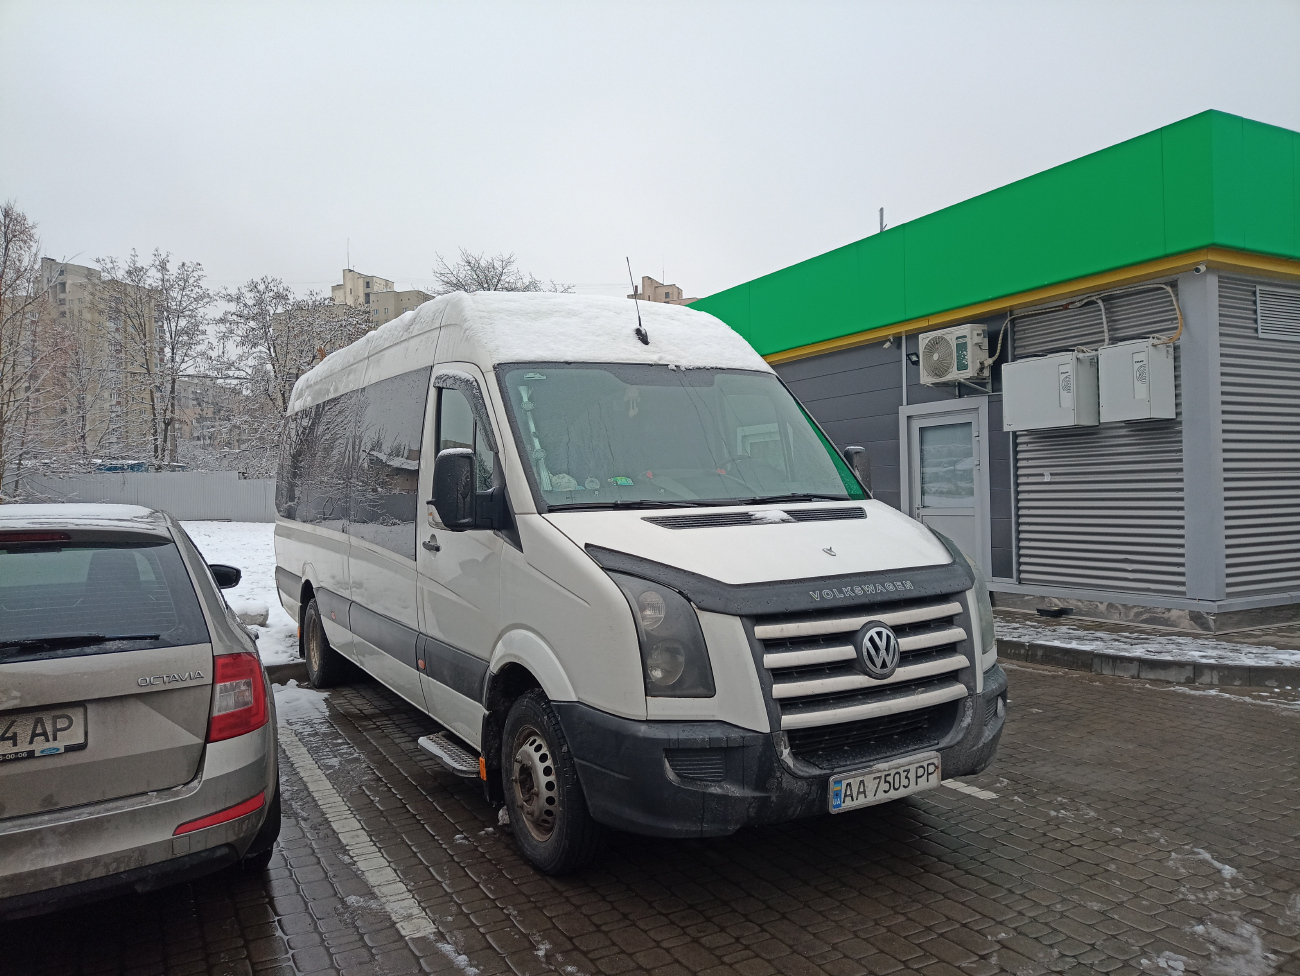 Kyiv, Carsport (VW Crafter) № АА 7503 РР